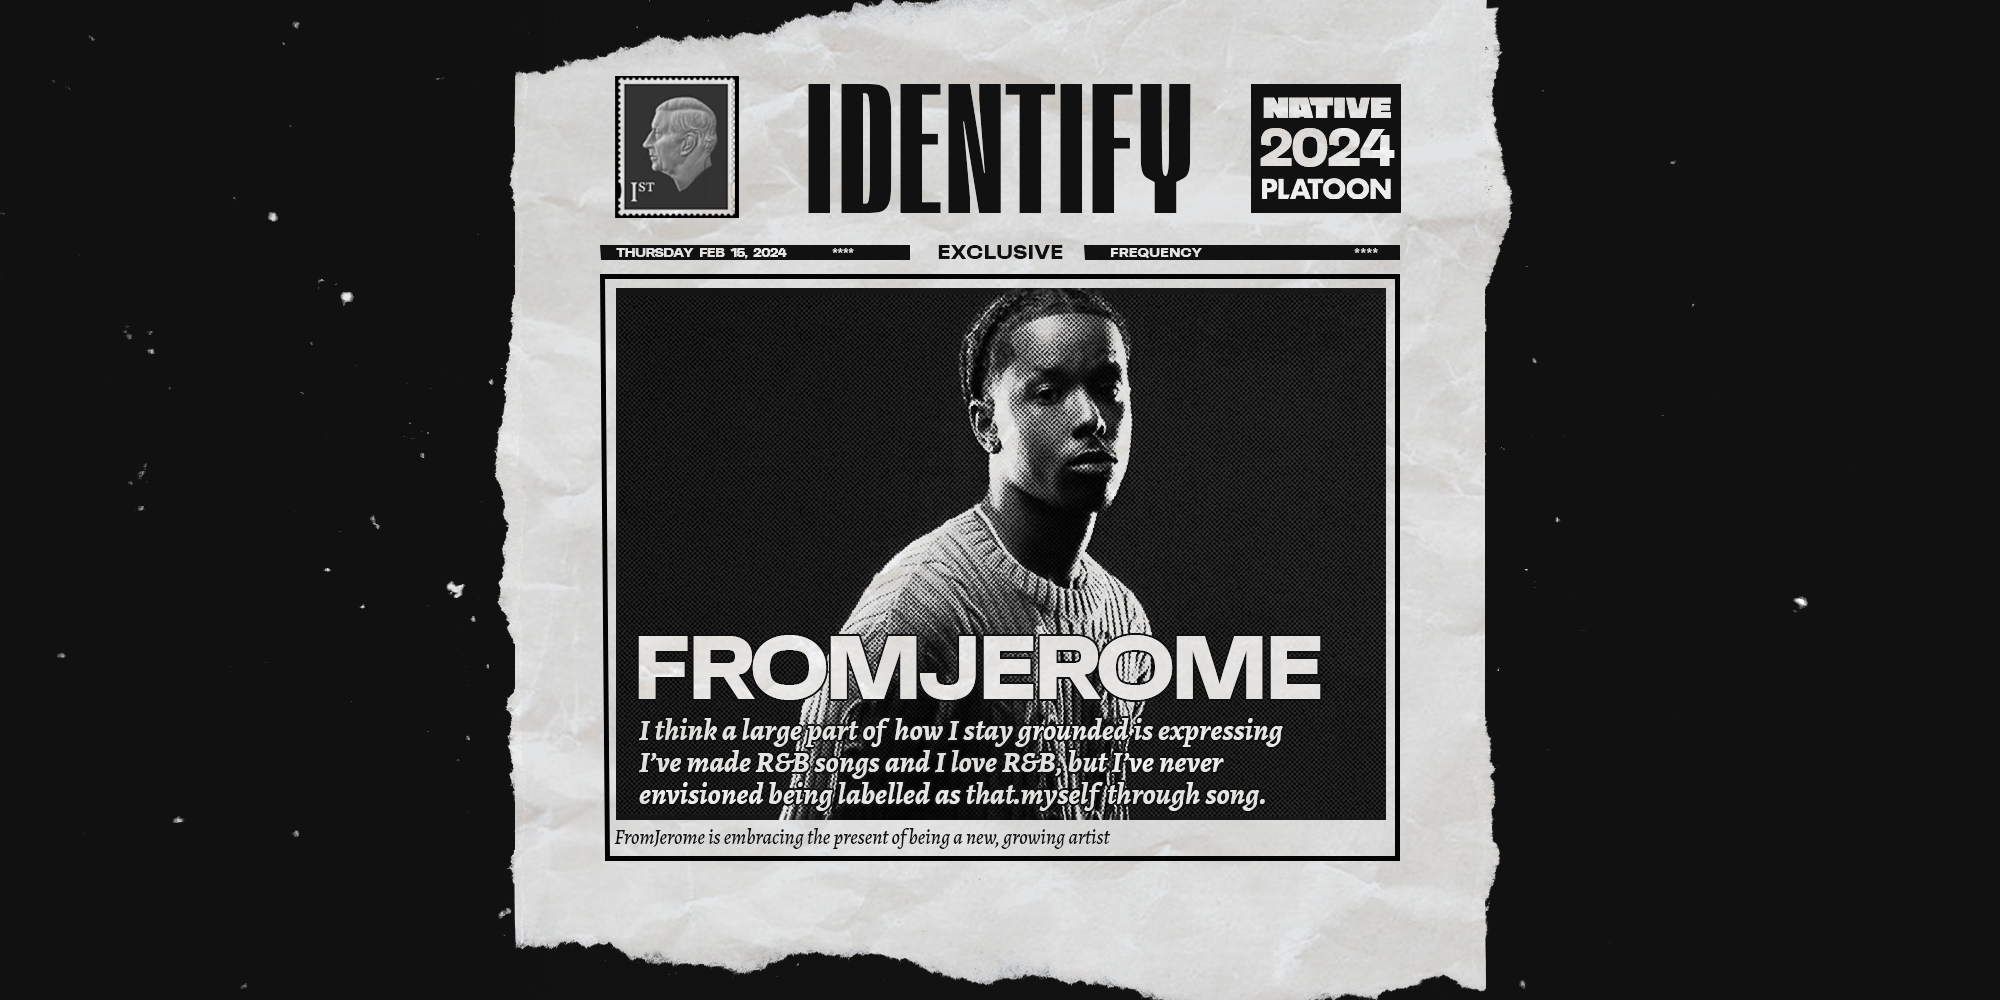 Identify: FromJerome is embracing the present of being a new, growing artist